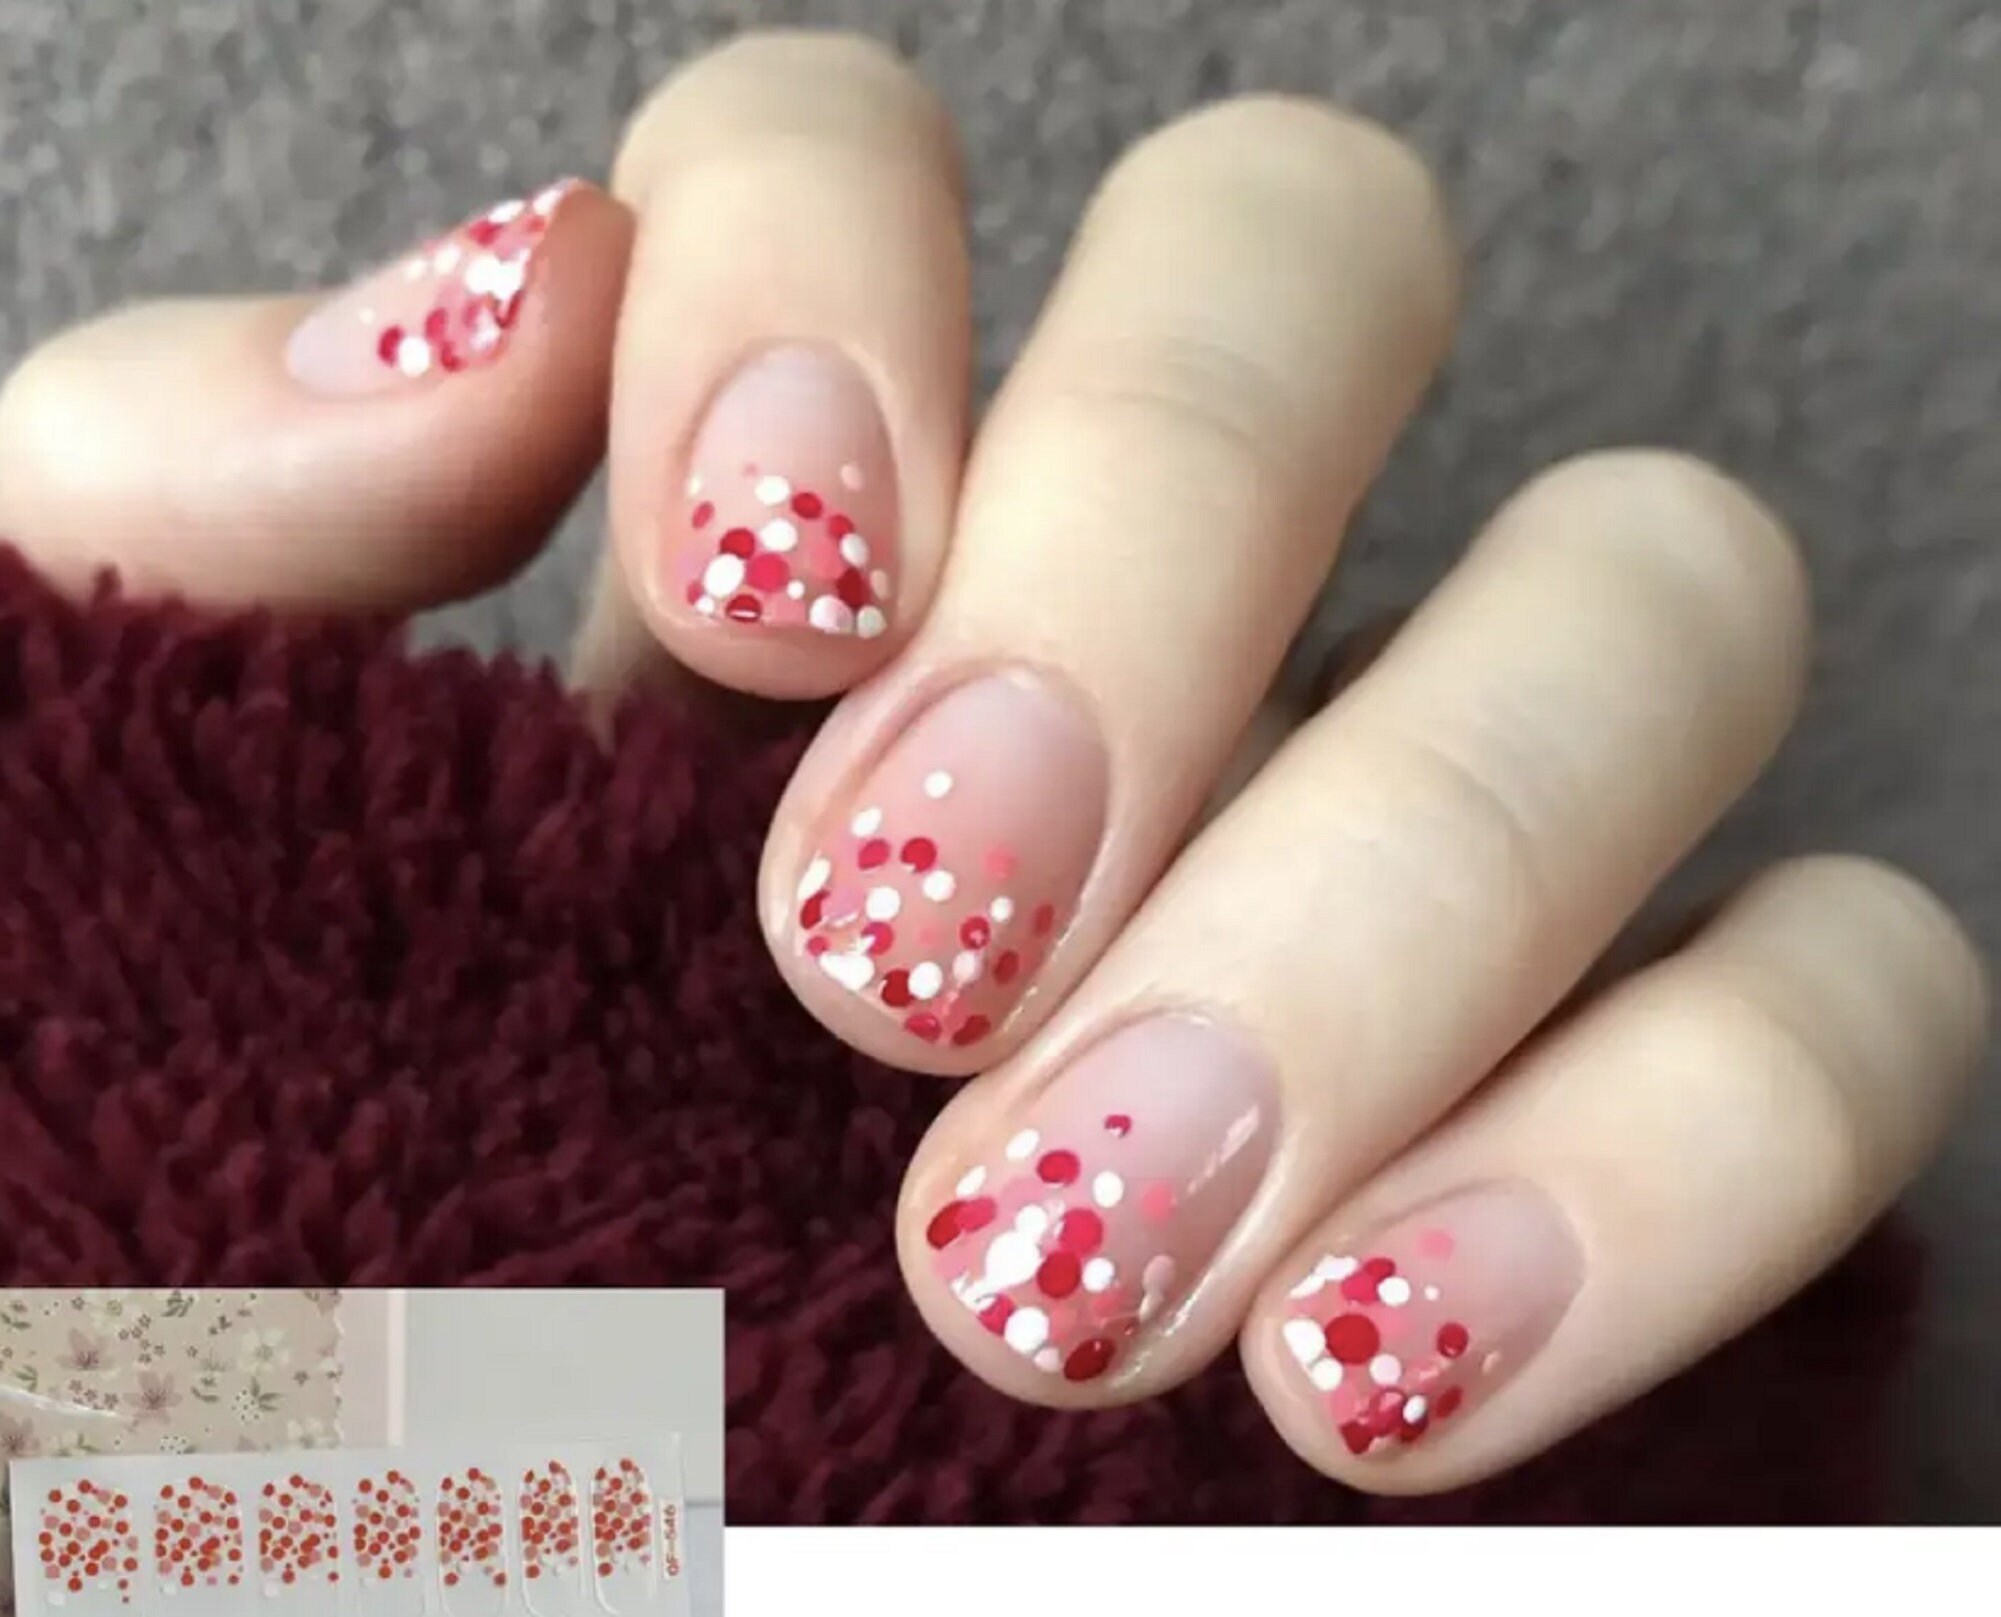 24 Pcs Summer Press on Nails Medium Square Fake Nails Colored Flowers  Design Glossy Acrylic Nails French Tip False Nails with White Dots Stick on  Nails Artificial Nails for Women and Girls